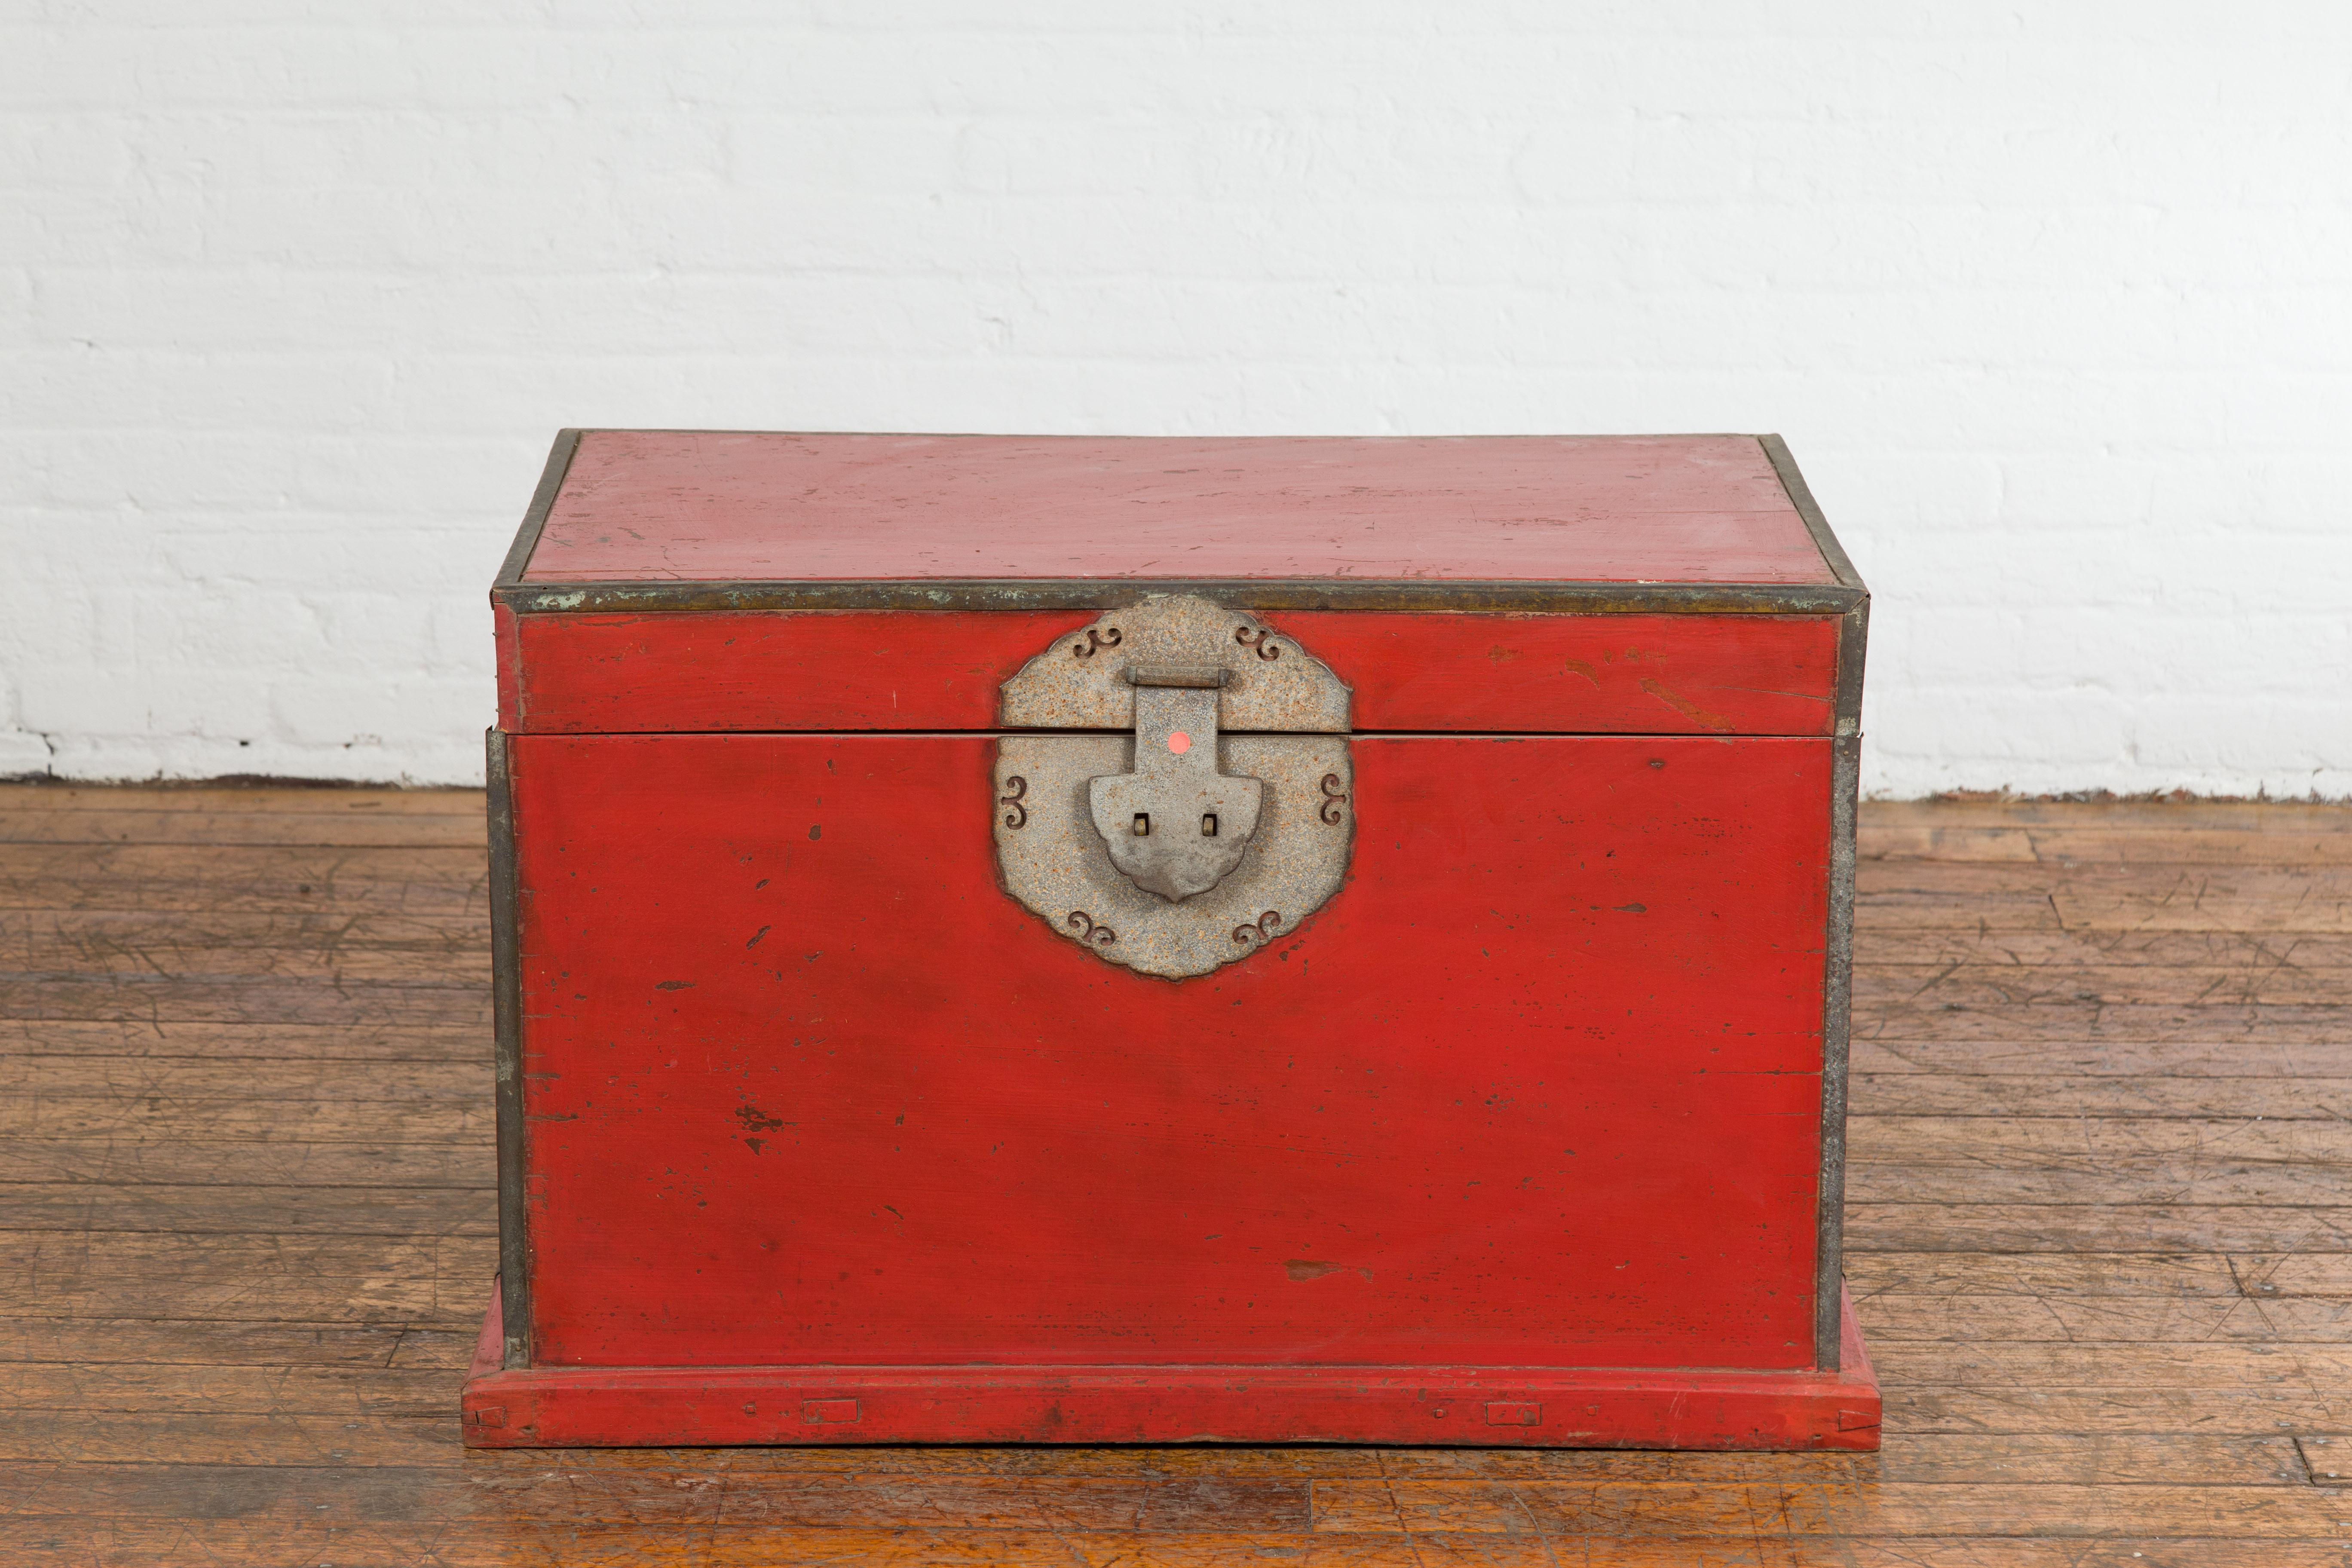 A Chinese Qing Dynasty period red lacquered blanket chest from the 19th century with metal edging and lateral handles. This 19th century red lacquered blanket chest is an exemplar of the Qing Dynasty period, characterized by its vibrant hue, metal